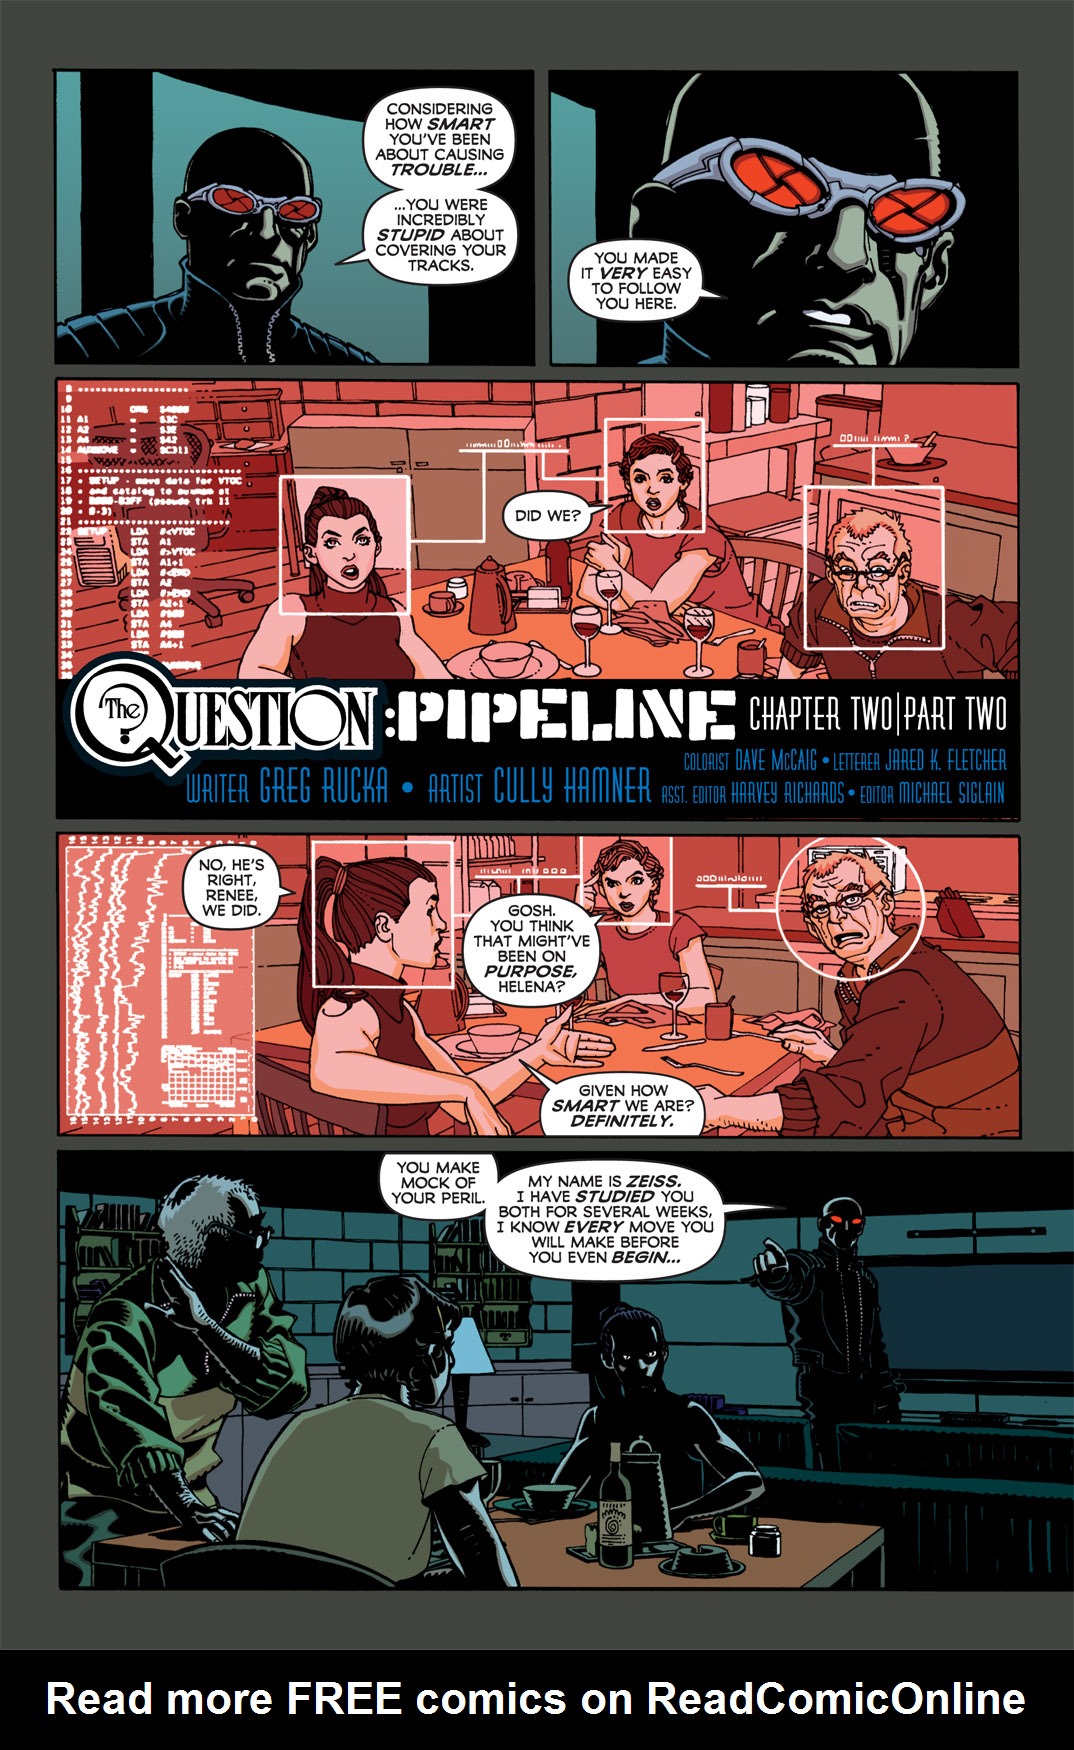 Read online The Question: Pipeline comic -  Issue # TPB - 63